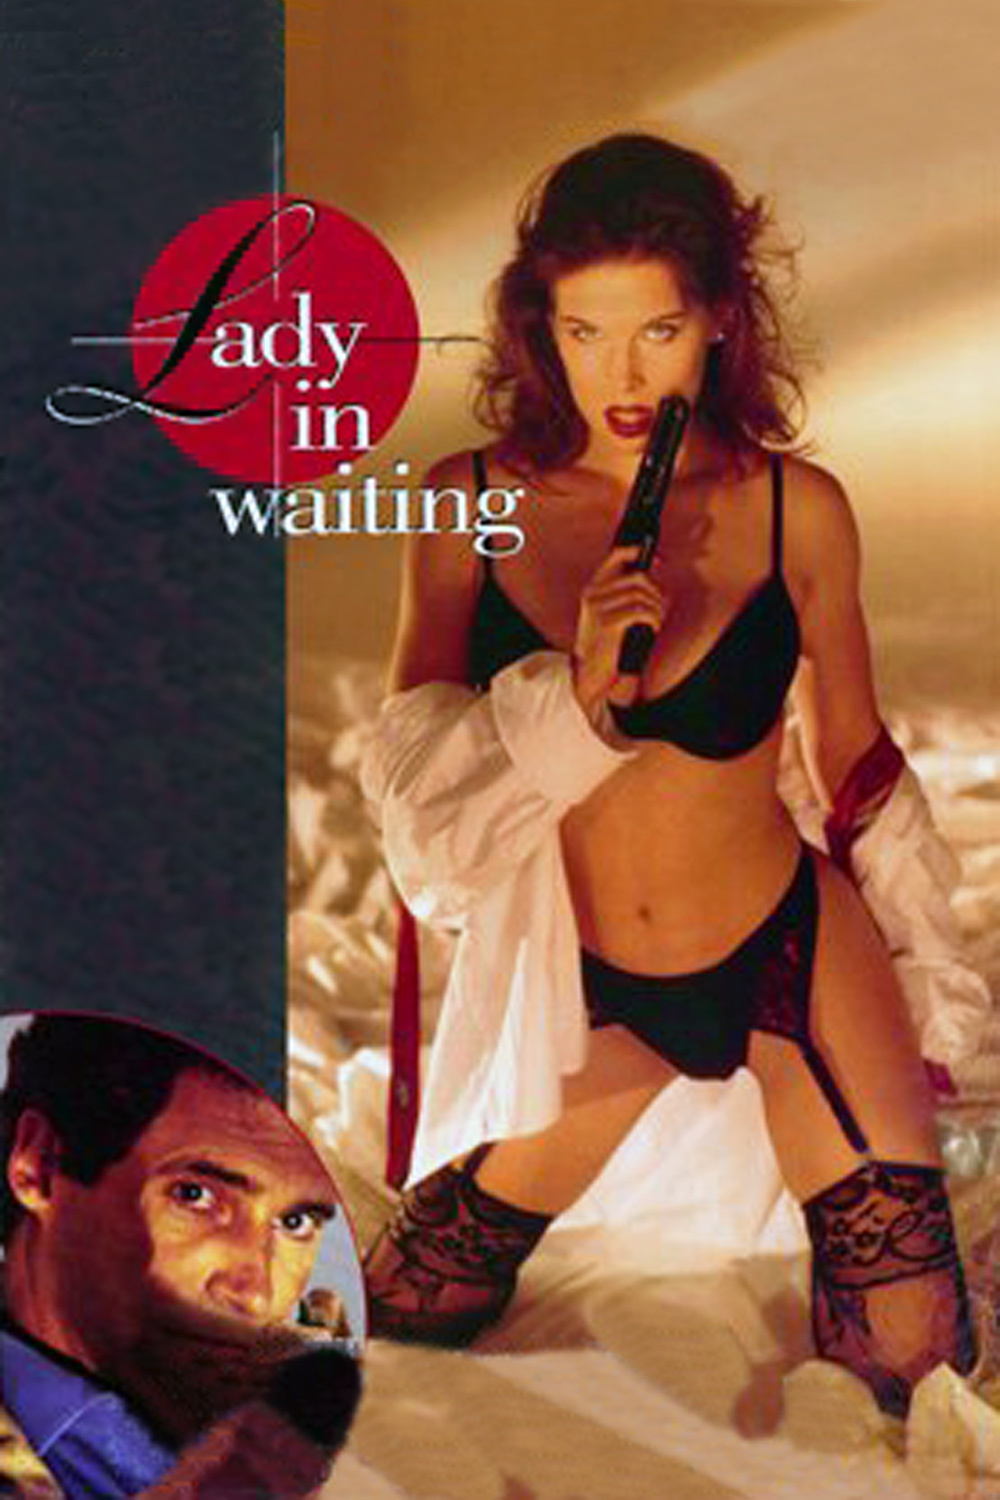 Lady in waiting film